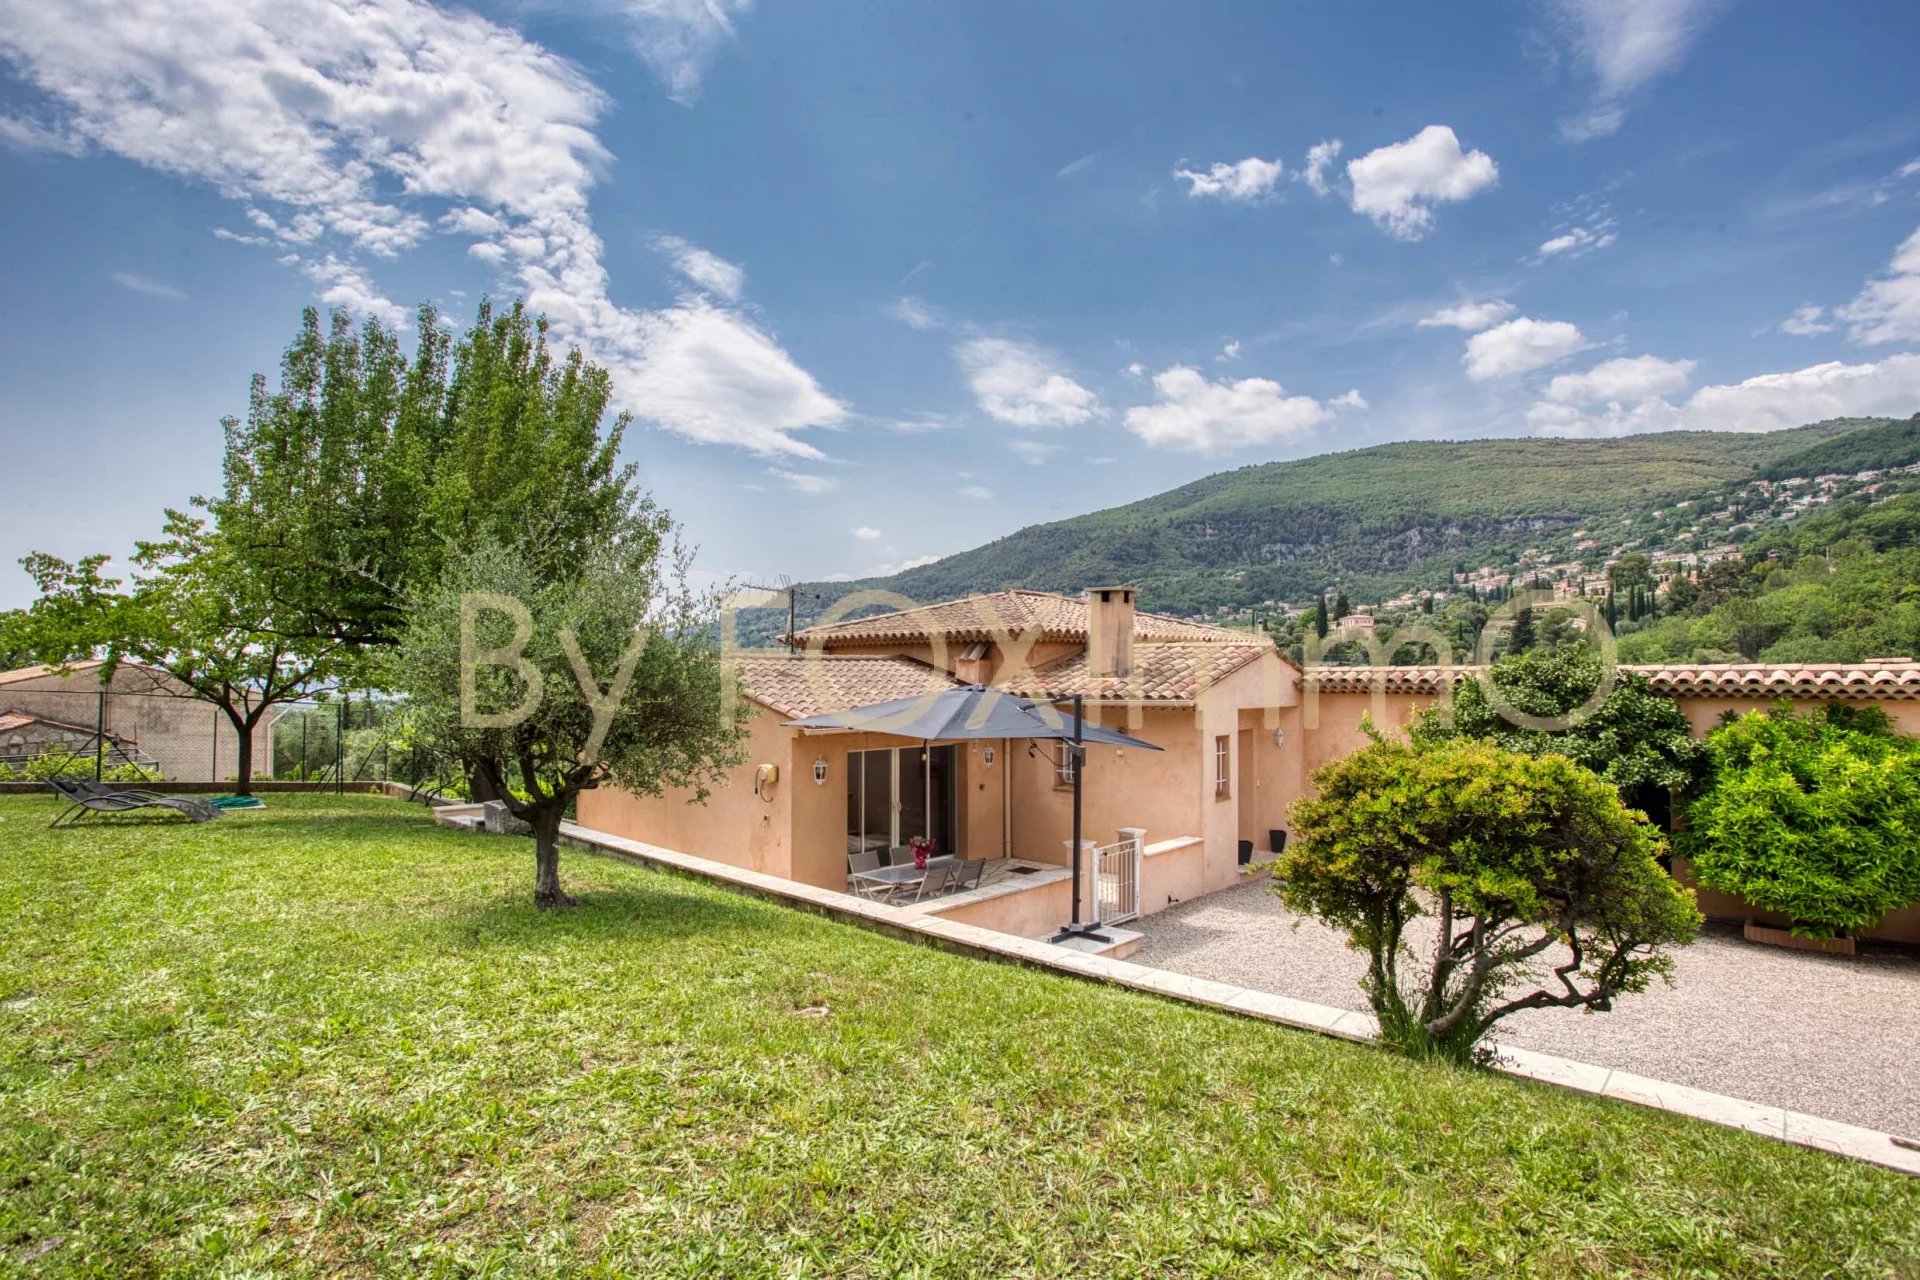 7-ROOM VILLA - ABSOLUTE CALM - SOUTH-WEST FACING